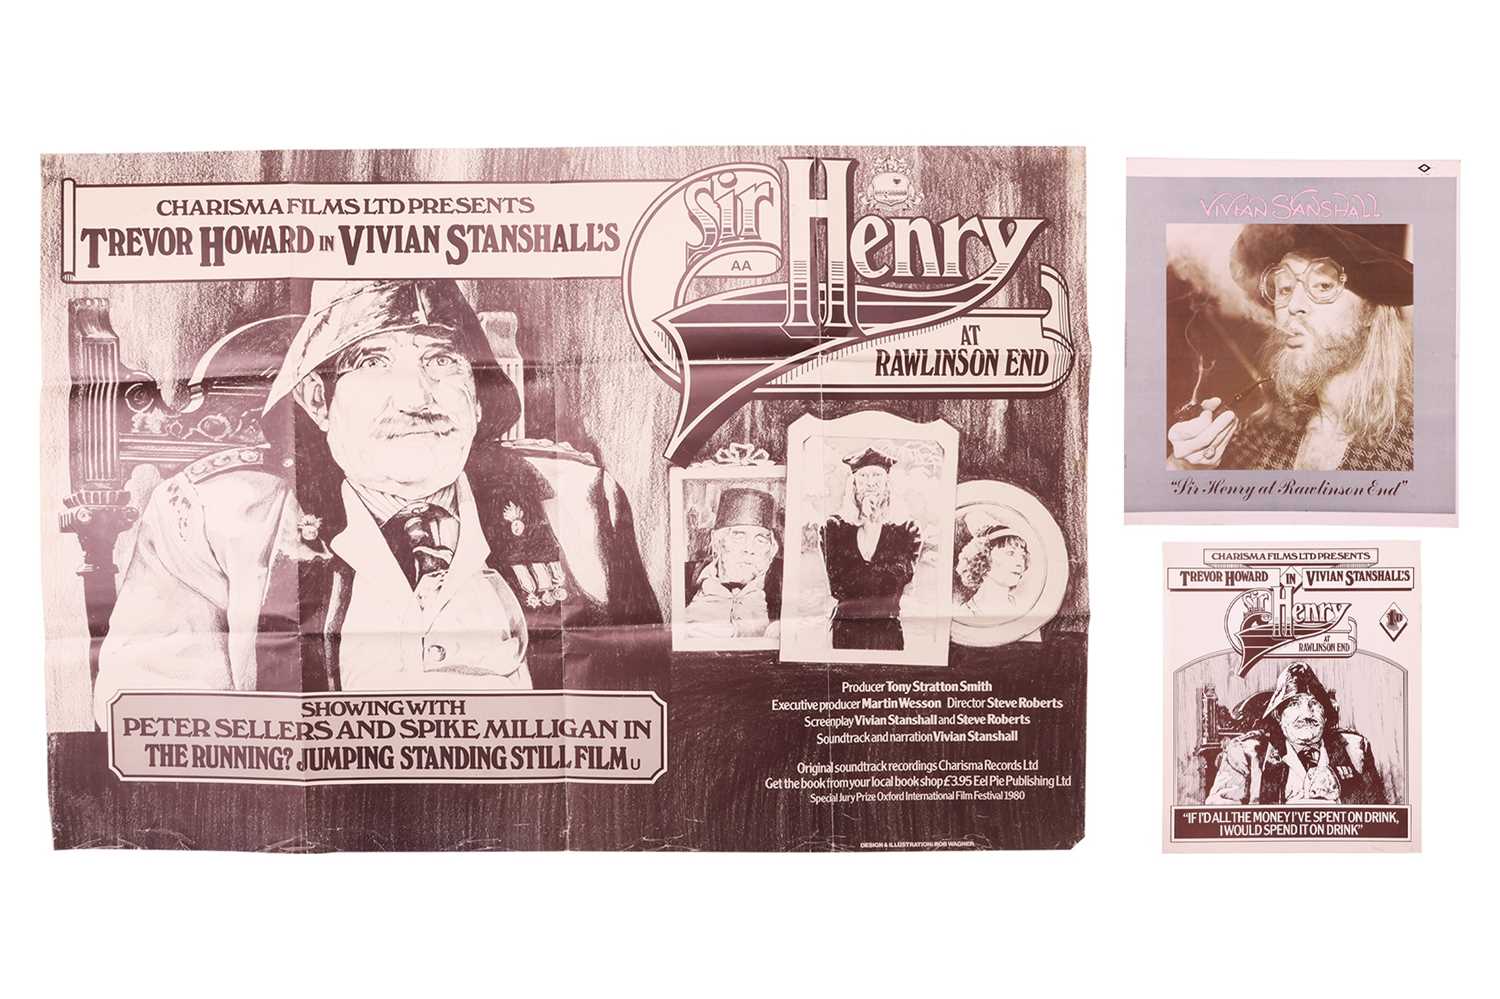 Sir Henry at Rawlinson End: an original British quad poster for the 1980 film comedy written by Vivi